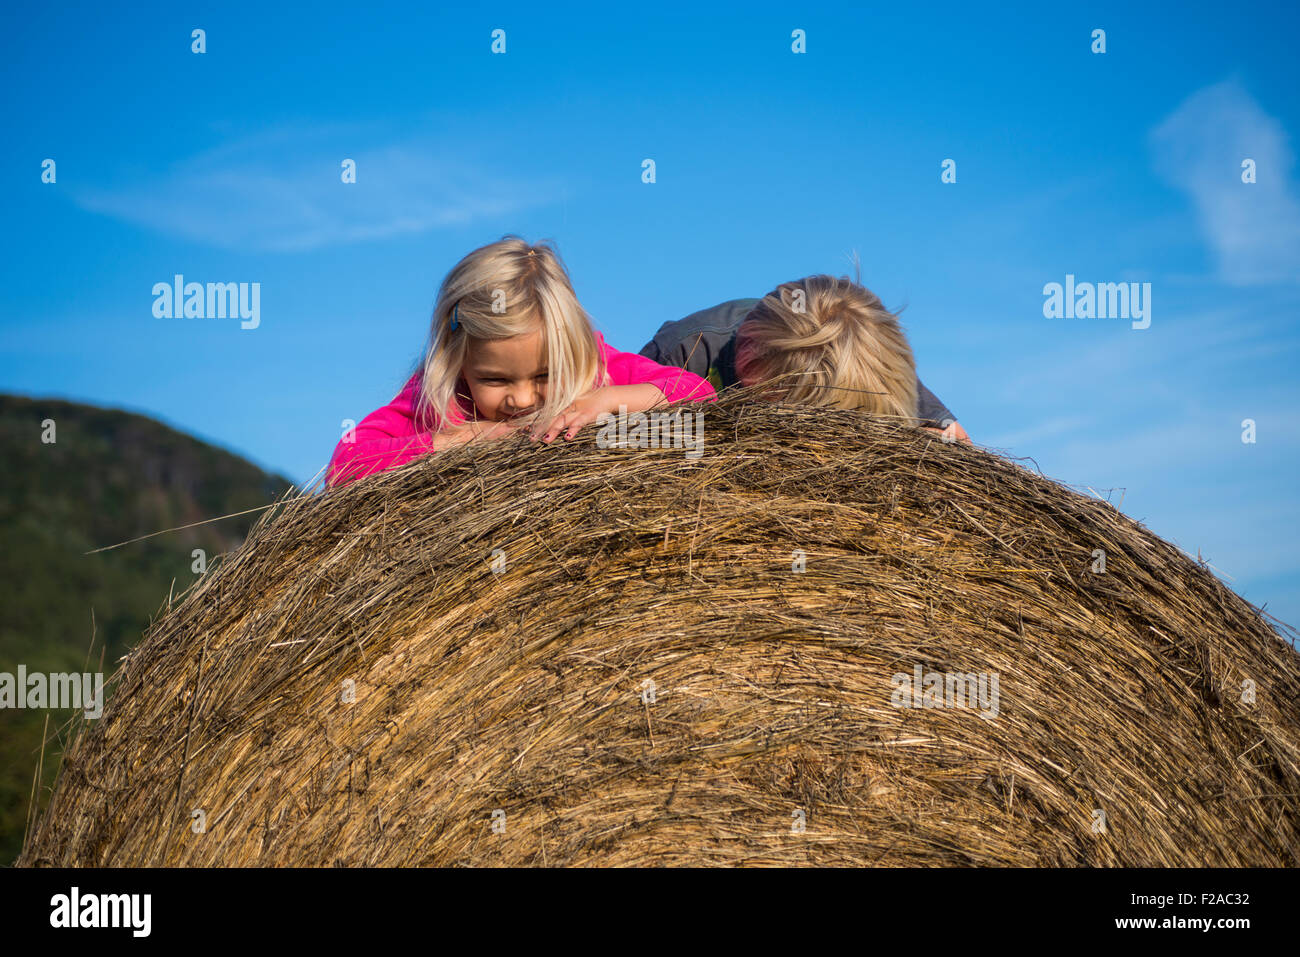 Children blond girl and boy (siblings) resting on hay bale, summer, holiday, relaxing Stock Photo